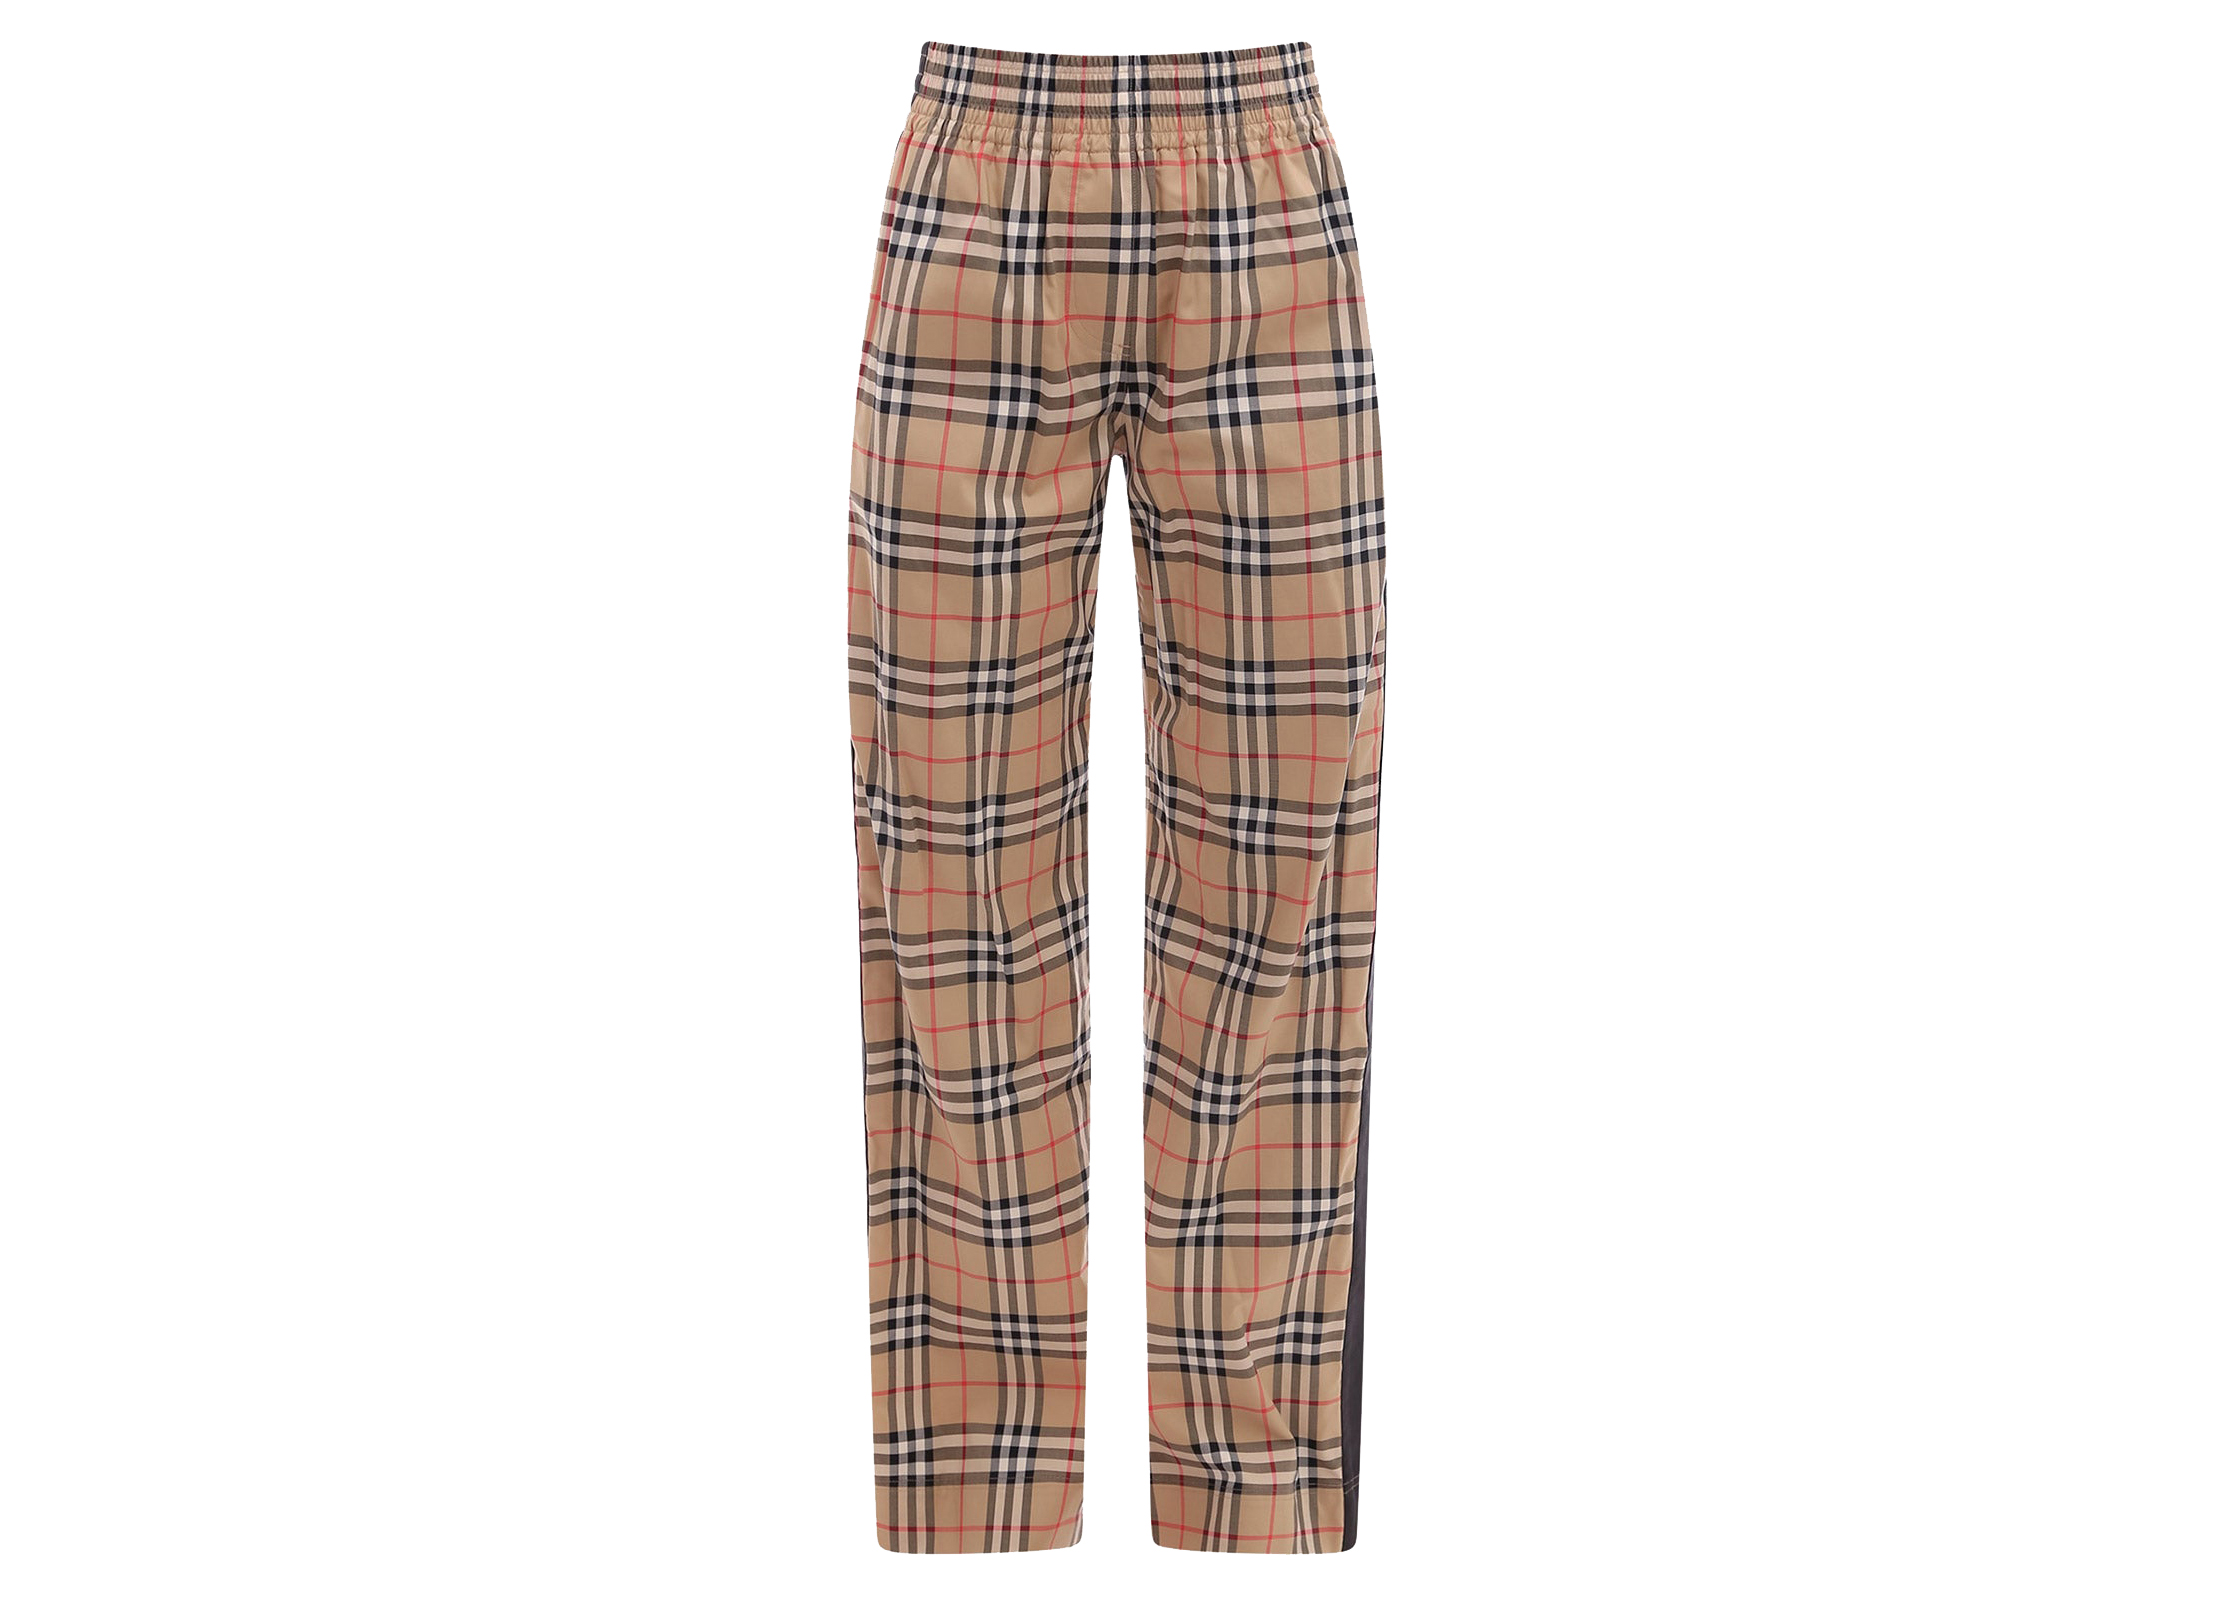 Boutique BURBERRY Red and green plaid print wool slim fit pants Retail  price 550 Size XS